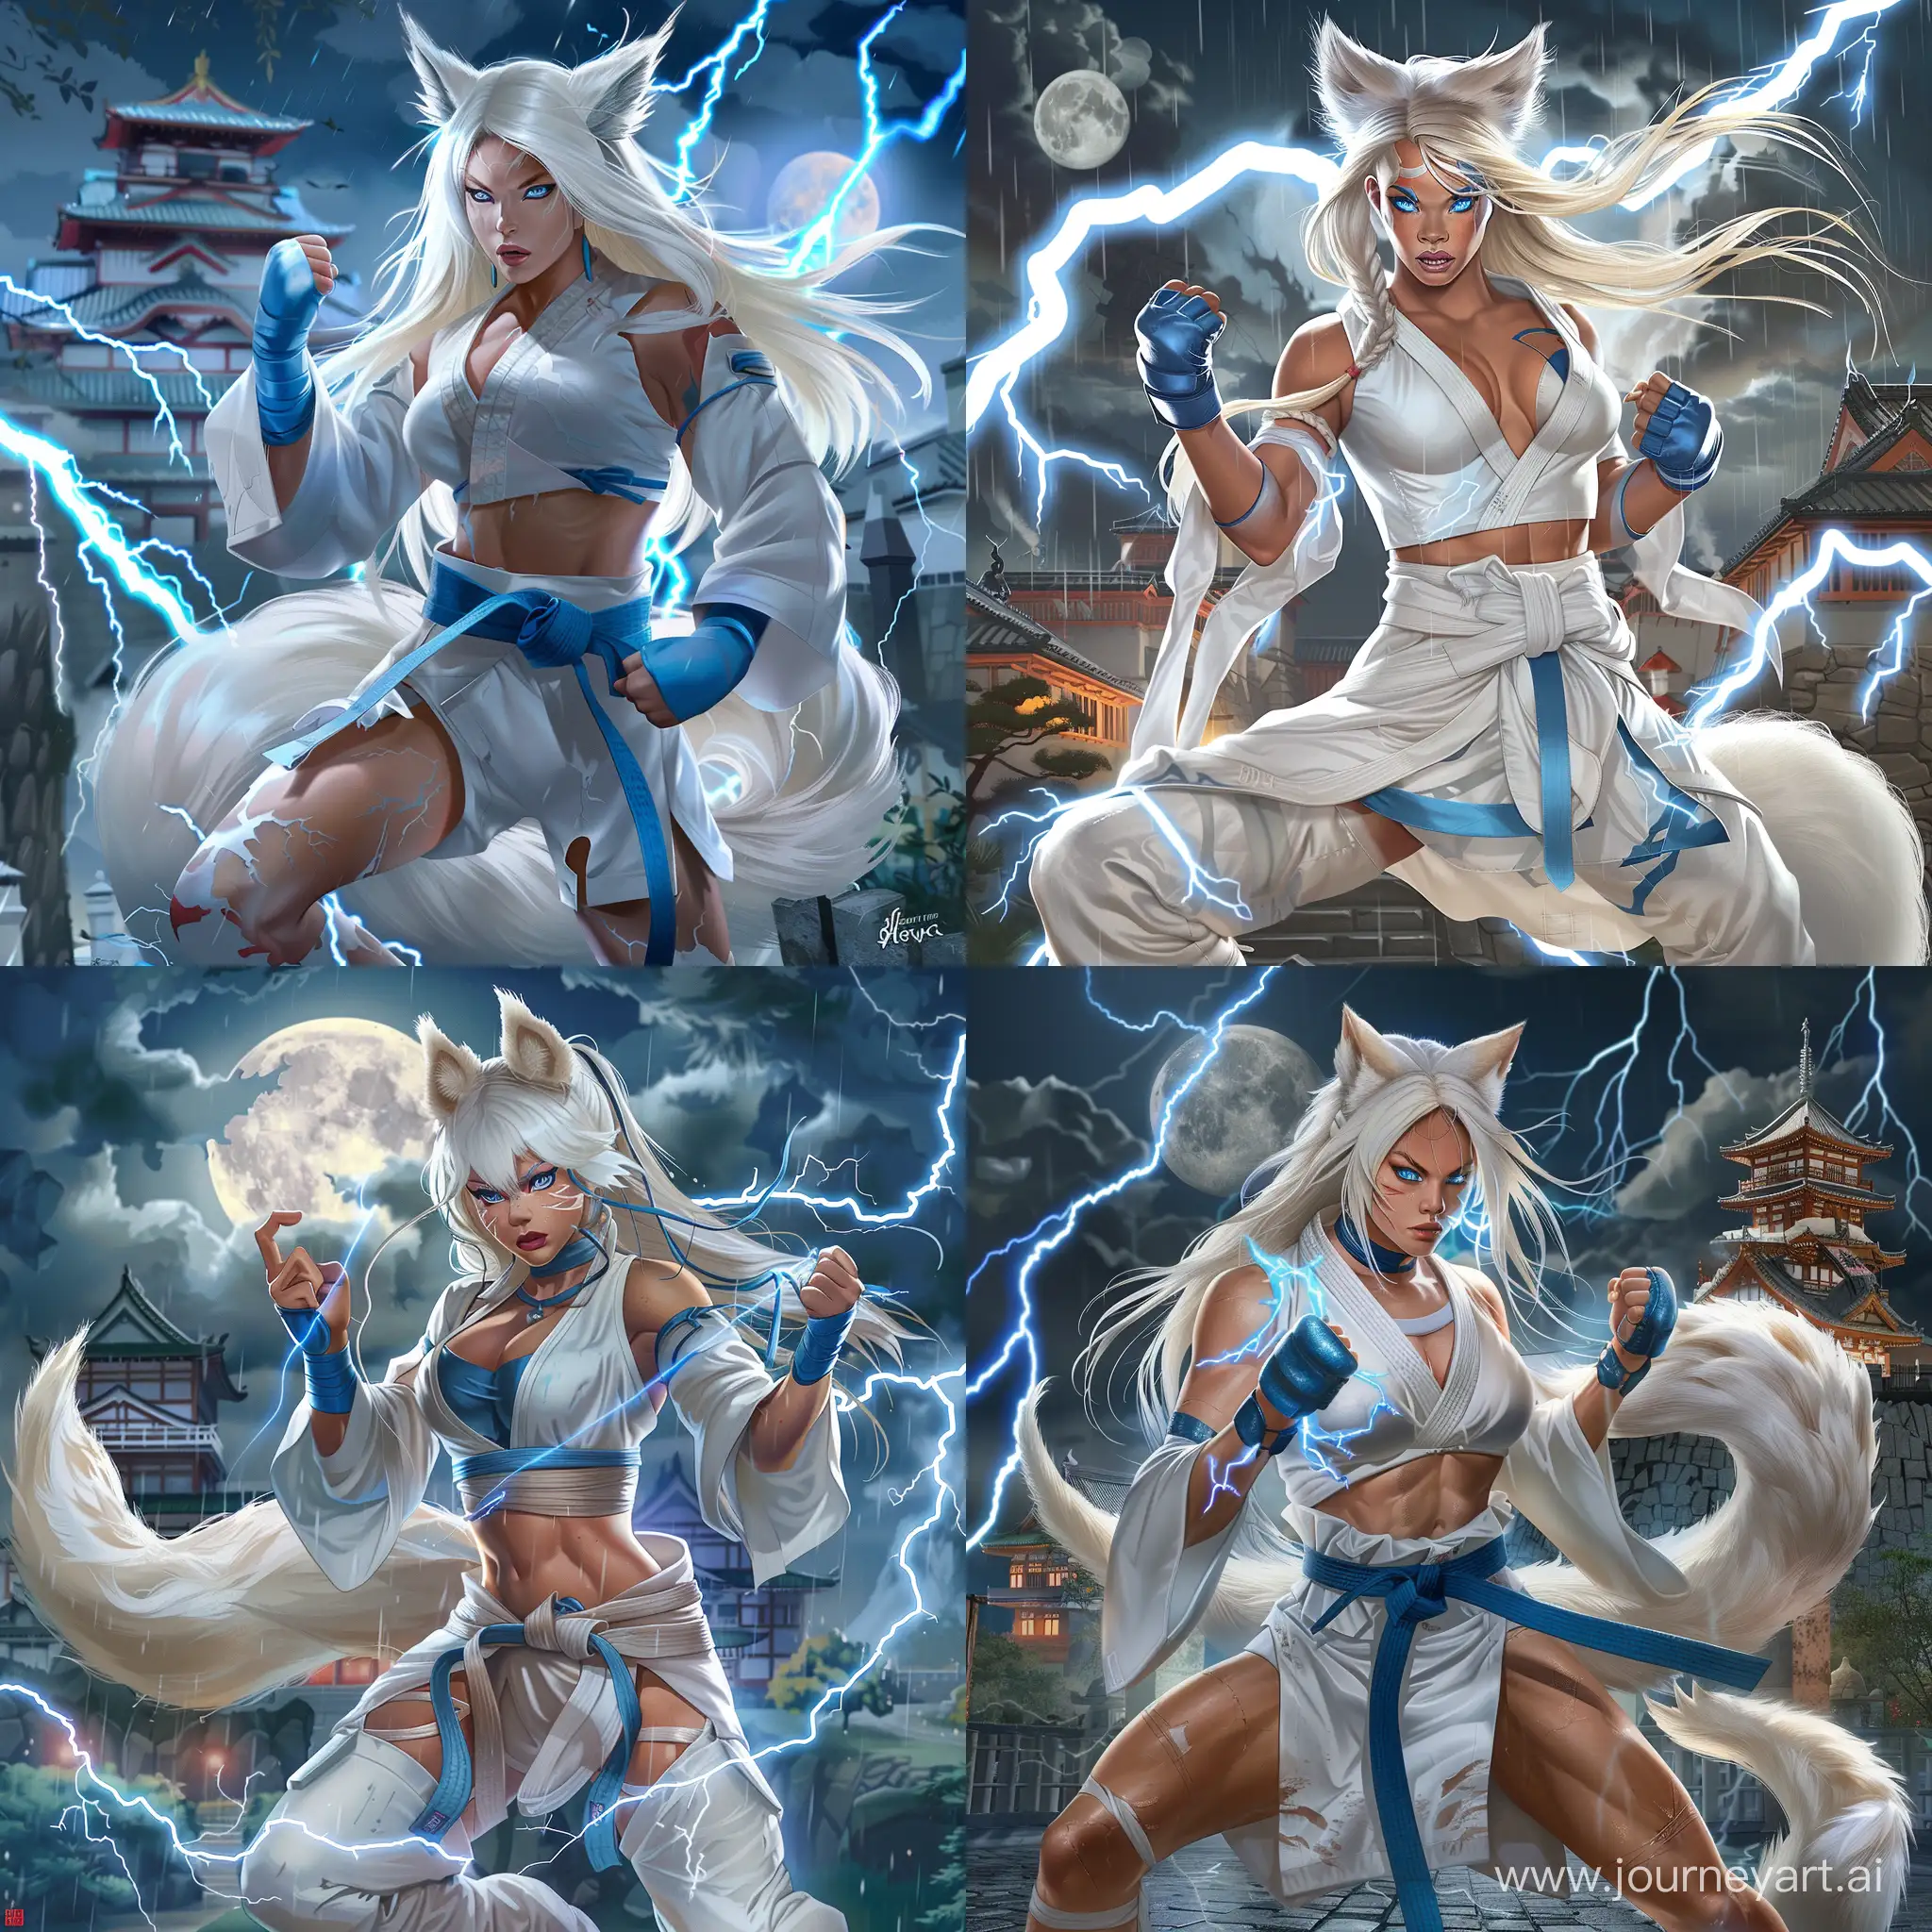 2d, 2d cartoon, full body, athletic, muscular, tan skin, adult, asian woman, long white hair, white fox ears, white fox tail attached to her waist, fierce blue eyes, wearing a white and blue martial arts gi, white chestwrap, baggy white martial arts pants, dynamic, blue fistwraps, blue footwraps, using lightning magic, surrounded by lightning, japanese castle, night, full moon